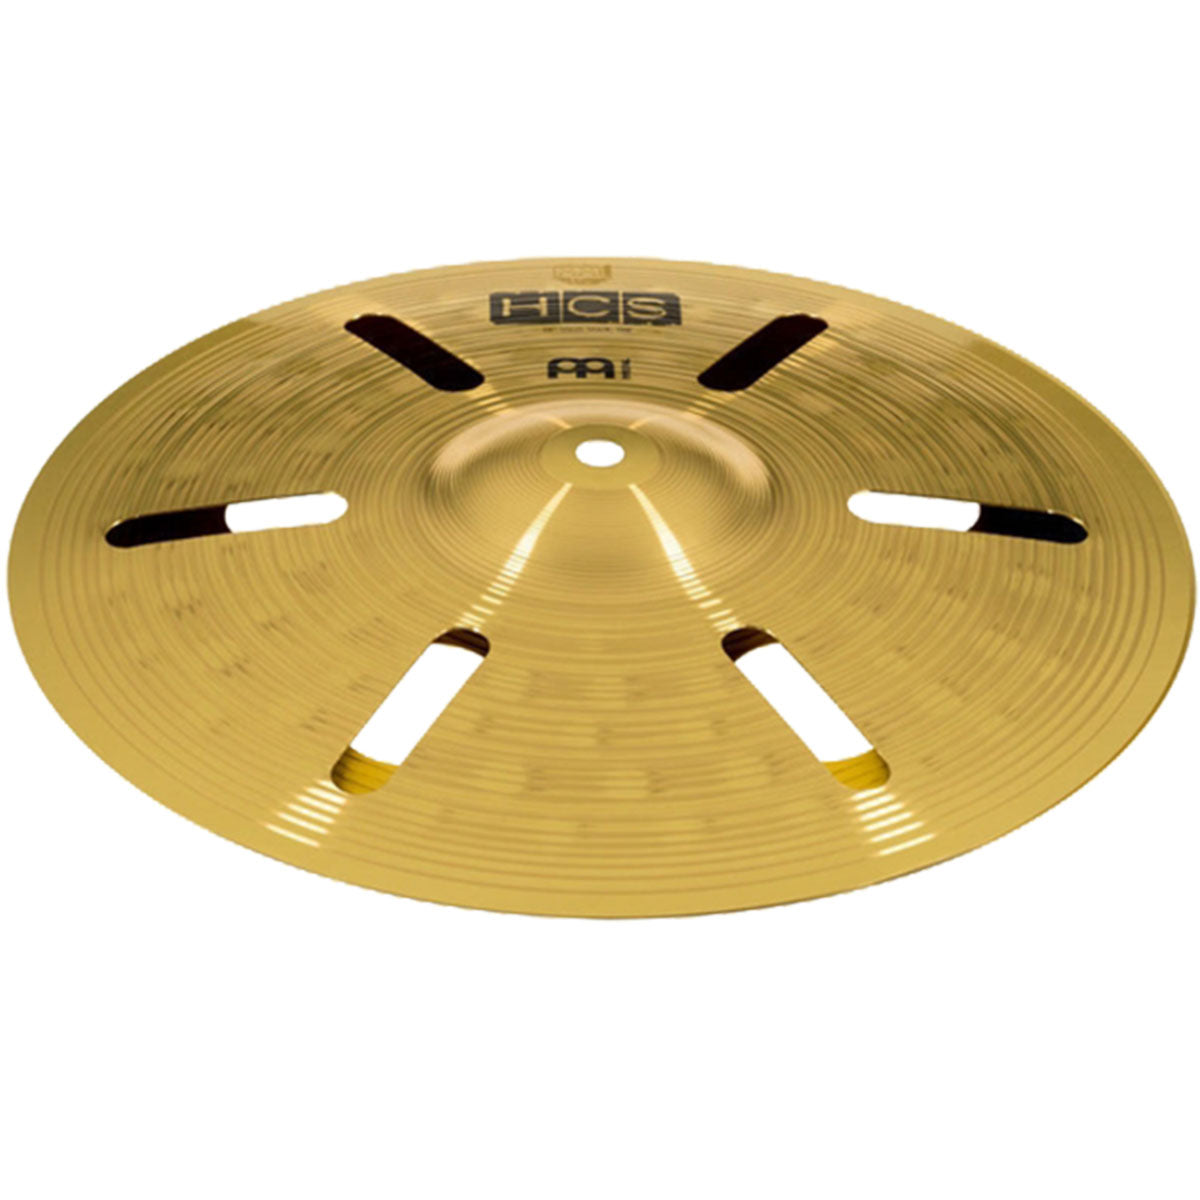 Meinl 14TRS HCS 14inch Trash Stack Cymbal